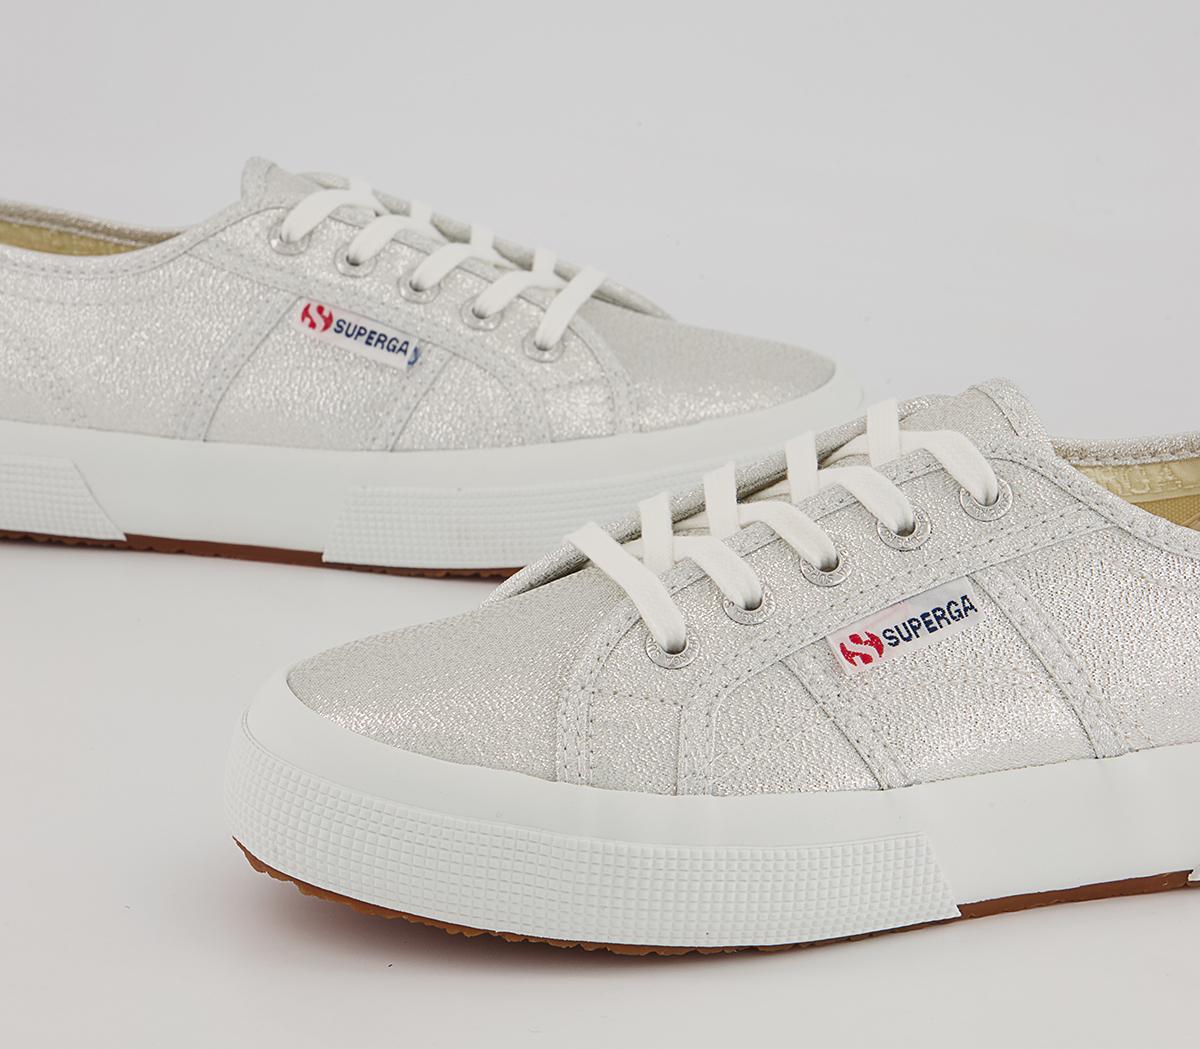 Superga 2750 Trainers Grey Silver - Women's Trainers